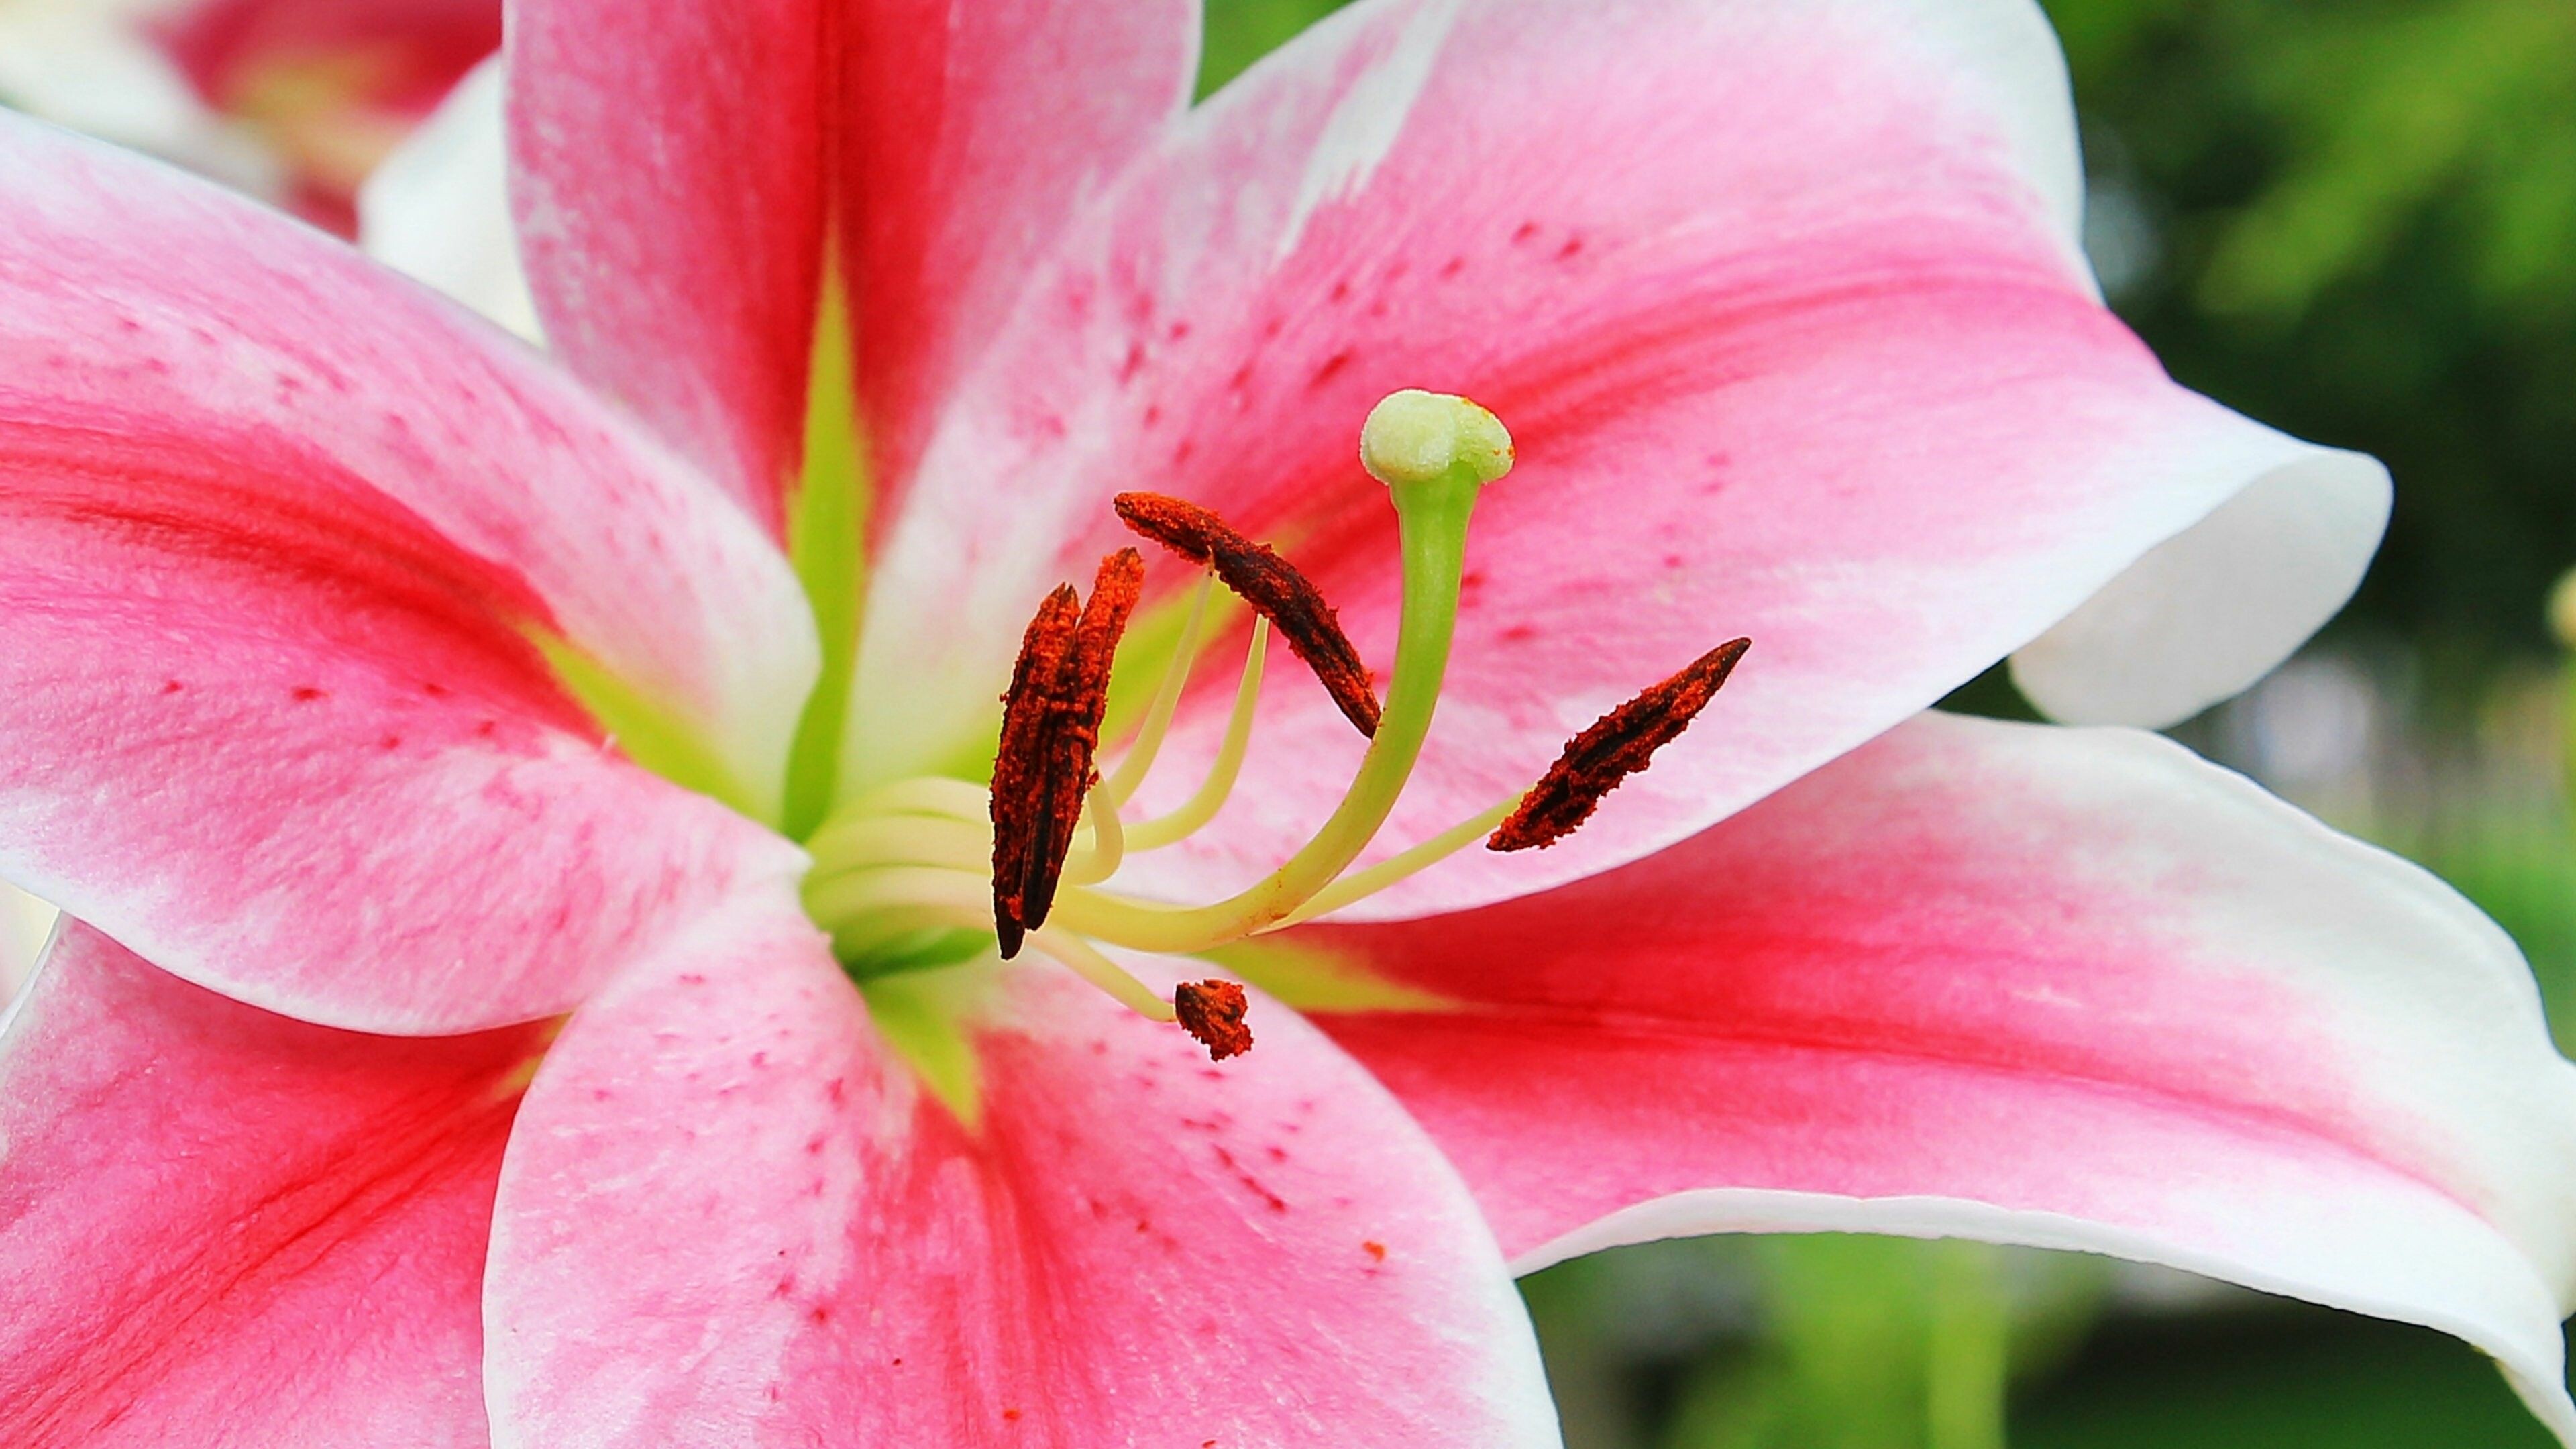 Lily: The crimson cultivar ‘Stargazer’, A popular hybrid with large, showy flowers that make it a showstopper when in bloom. 3840x2160 4K Wallpaper.